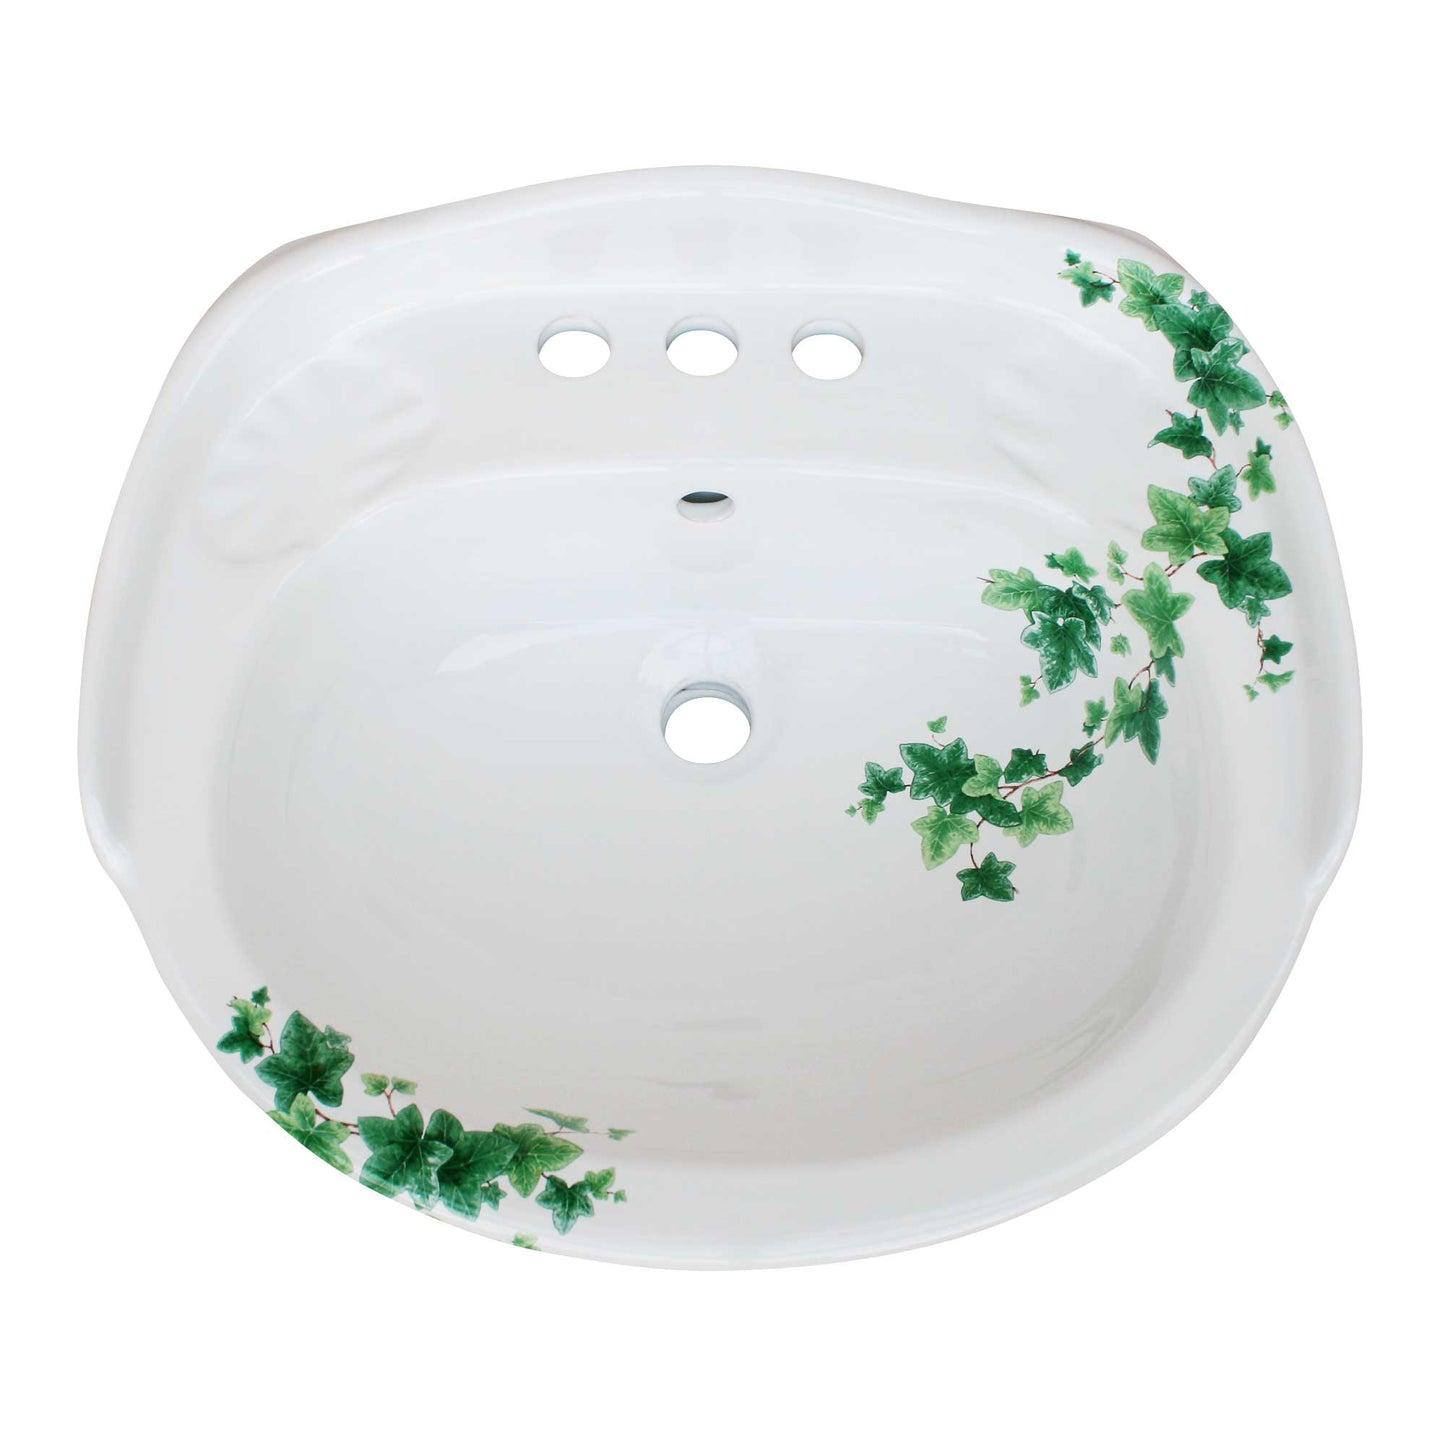 Traditional pedestal bowl painted with green ivy design